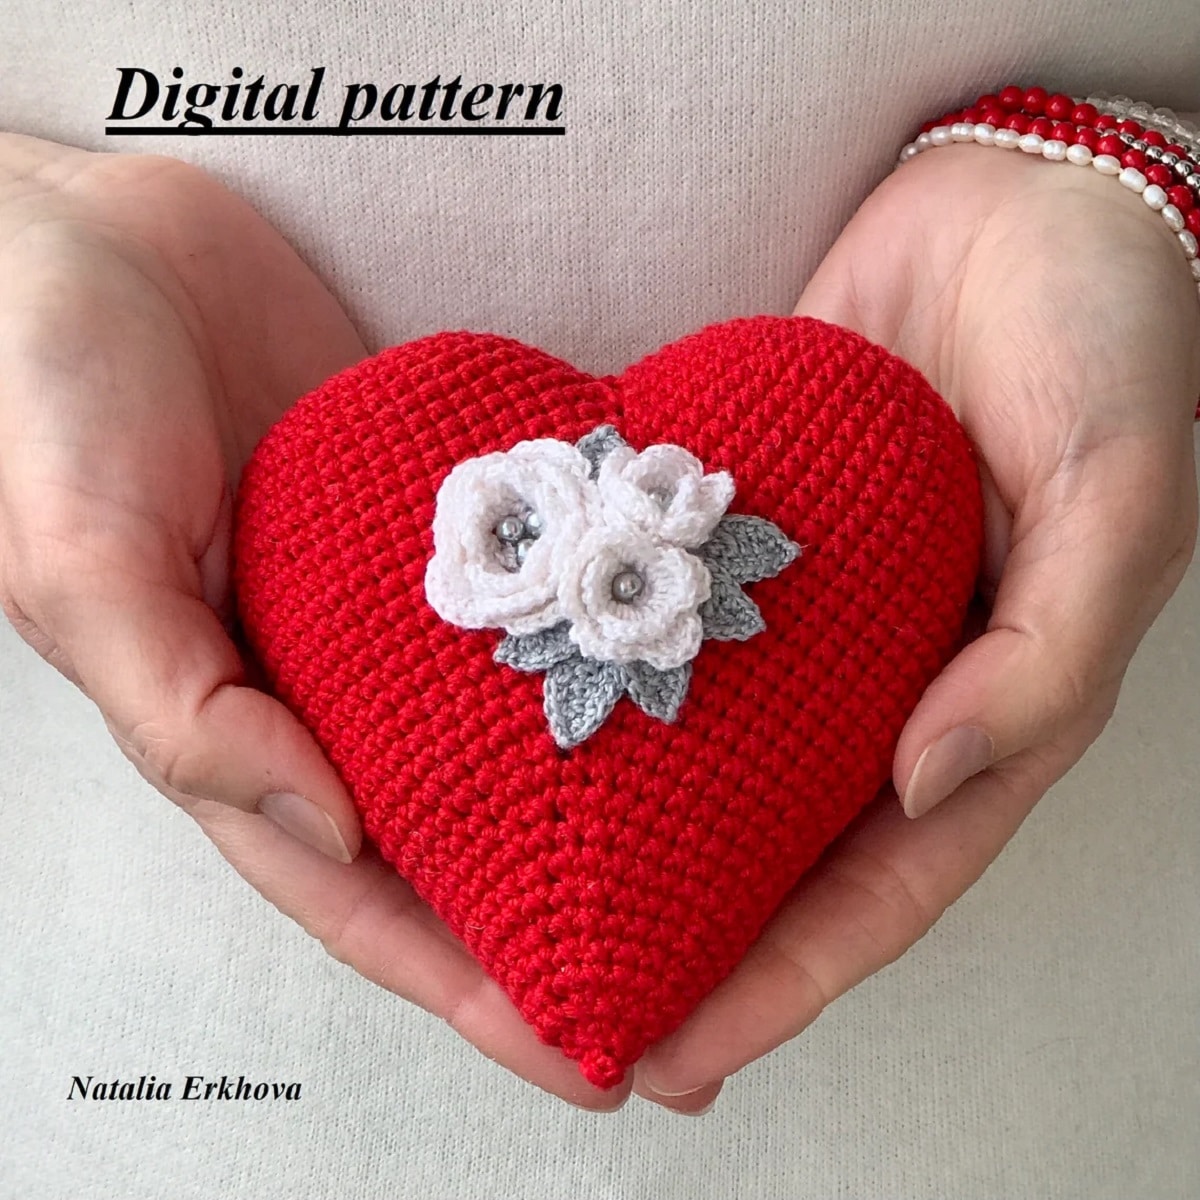 Crochet red heart stuffed with three small white flowers and green leaves stitched in the center held by two hands. 